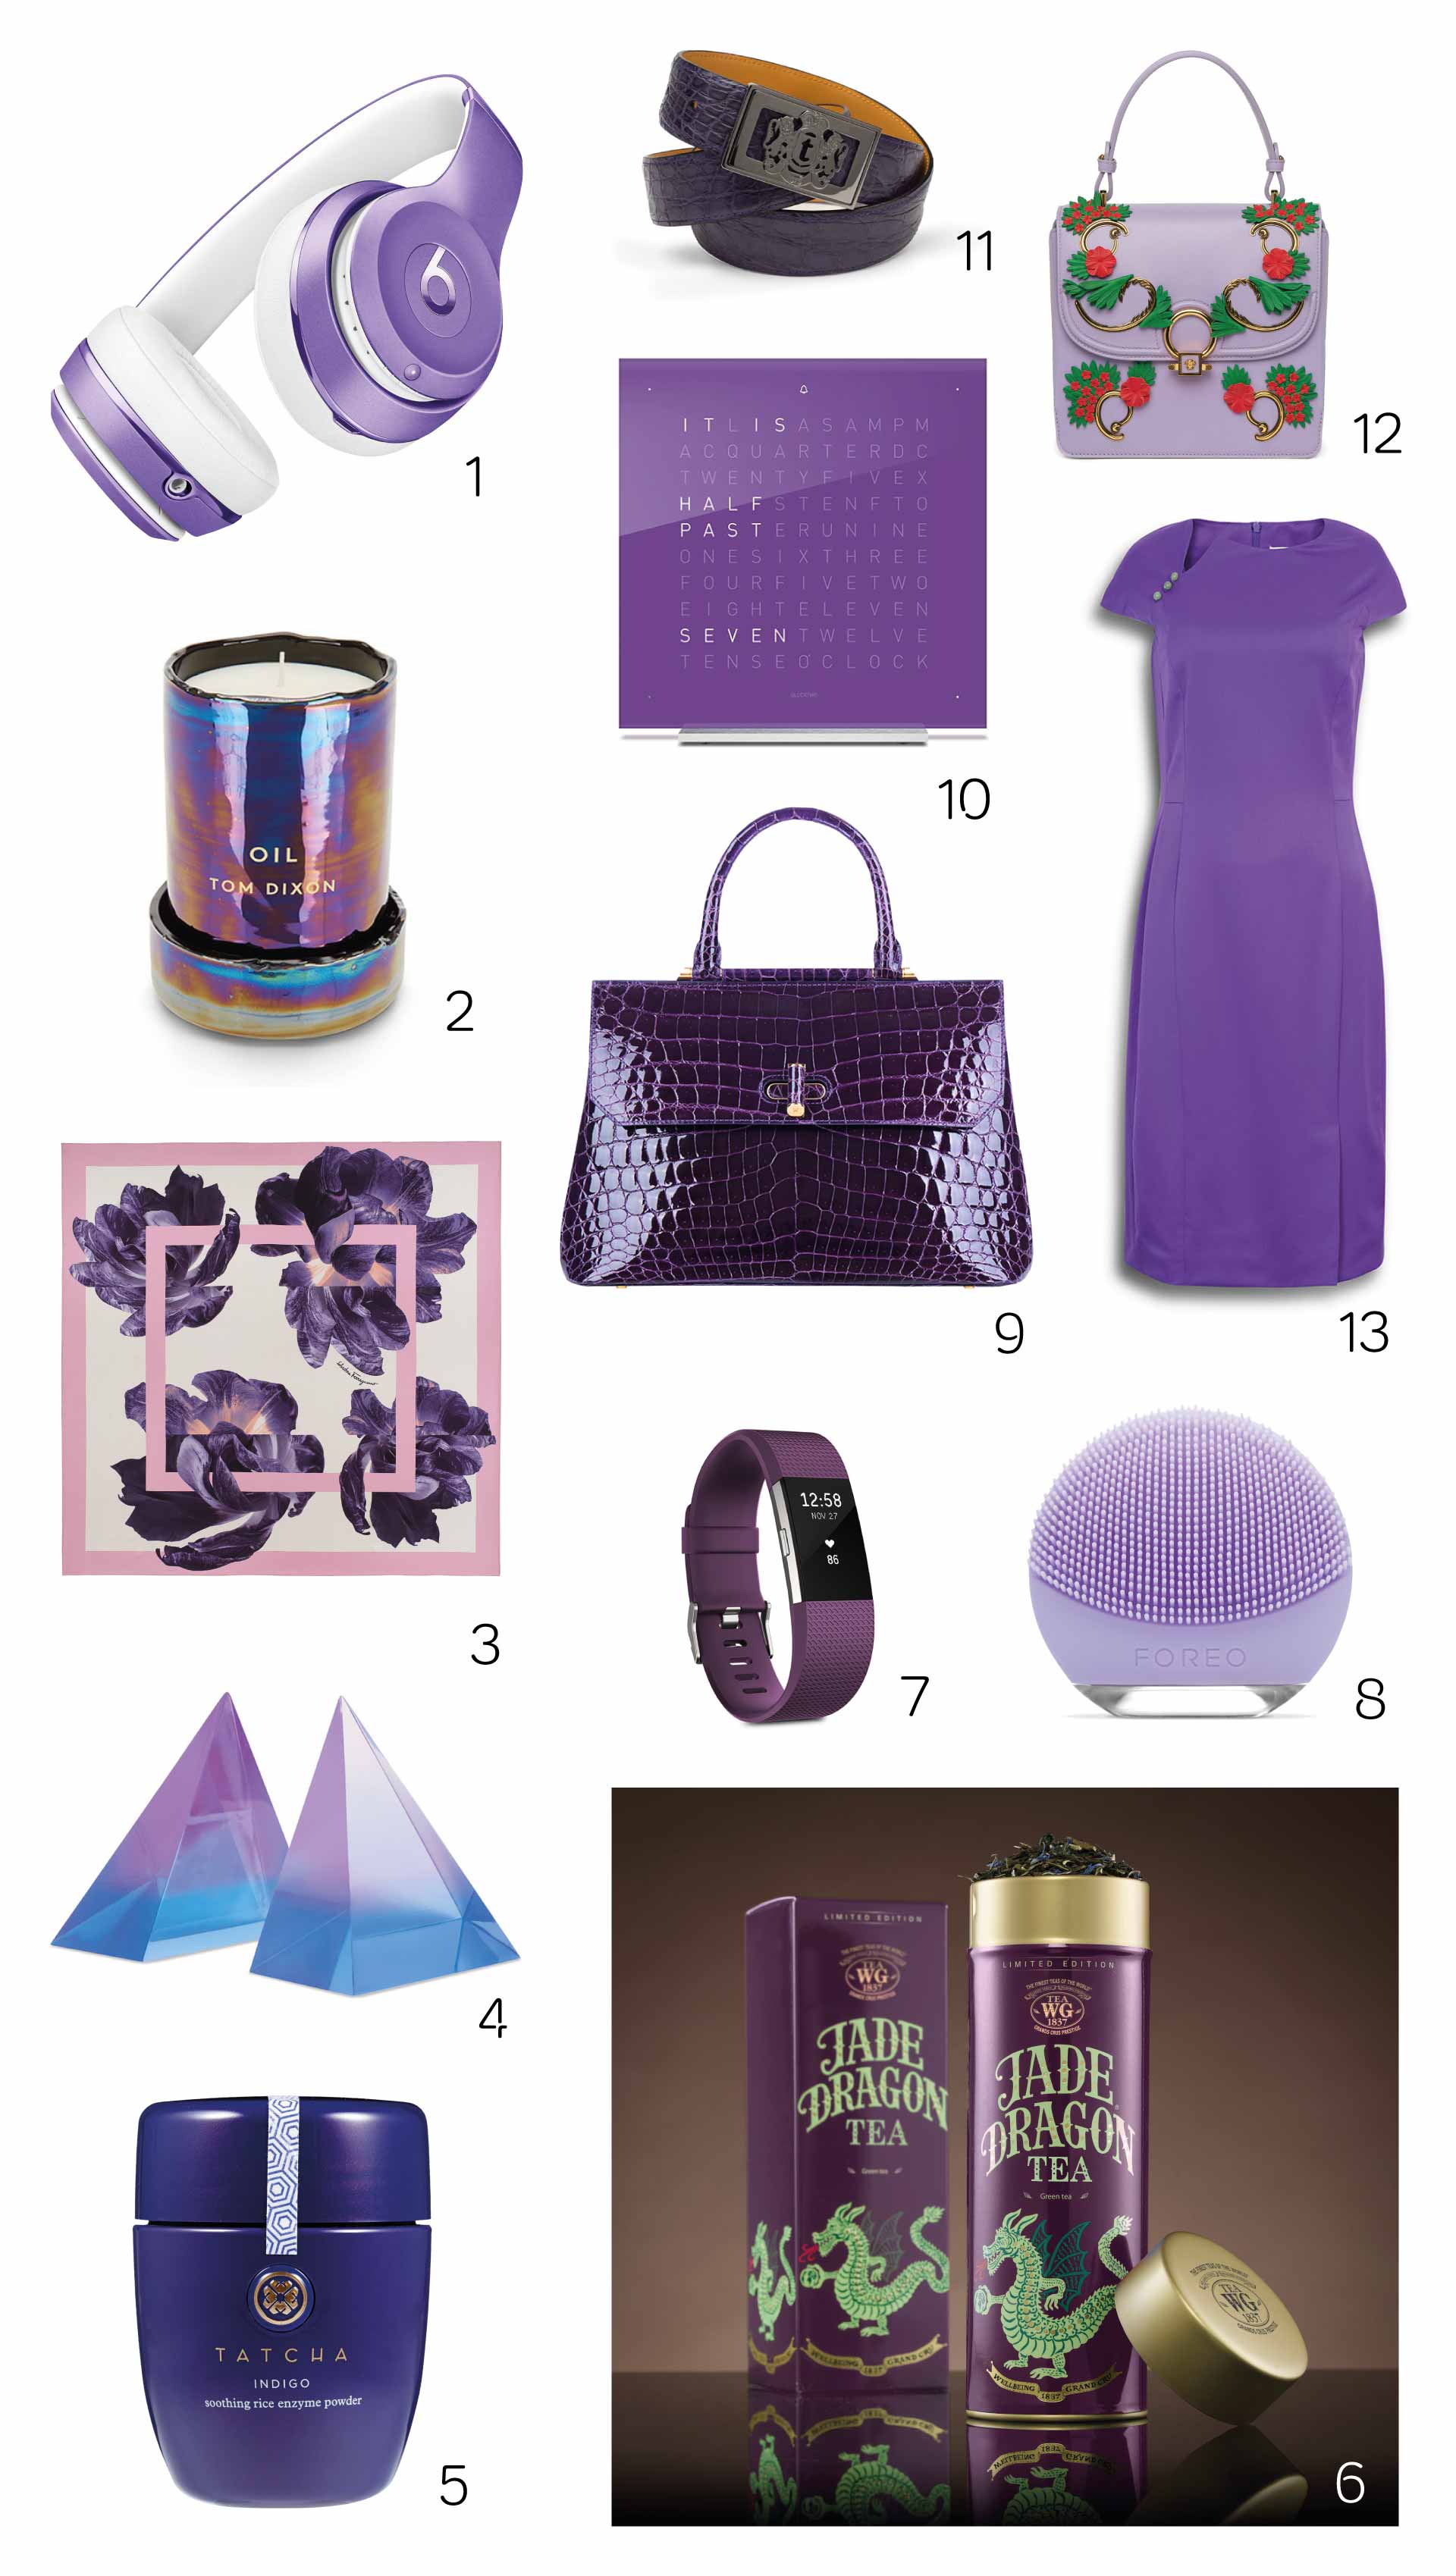 Our selection of Ultra Violet products